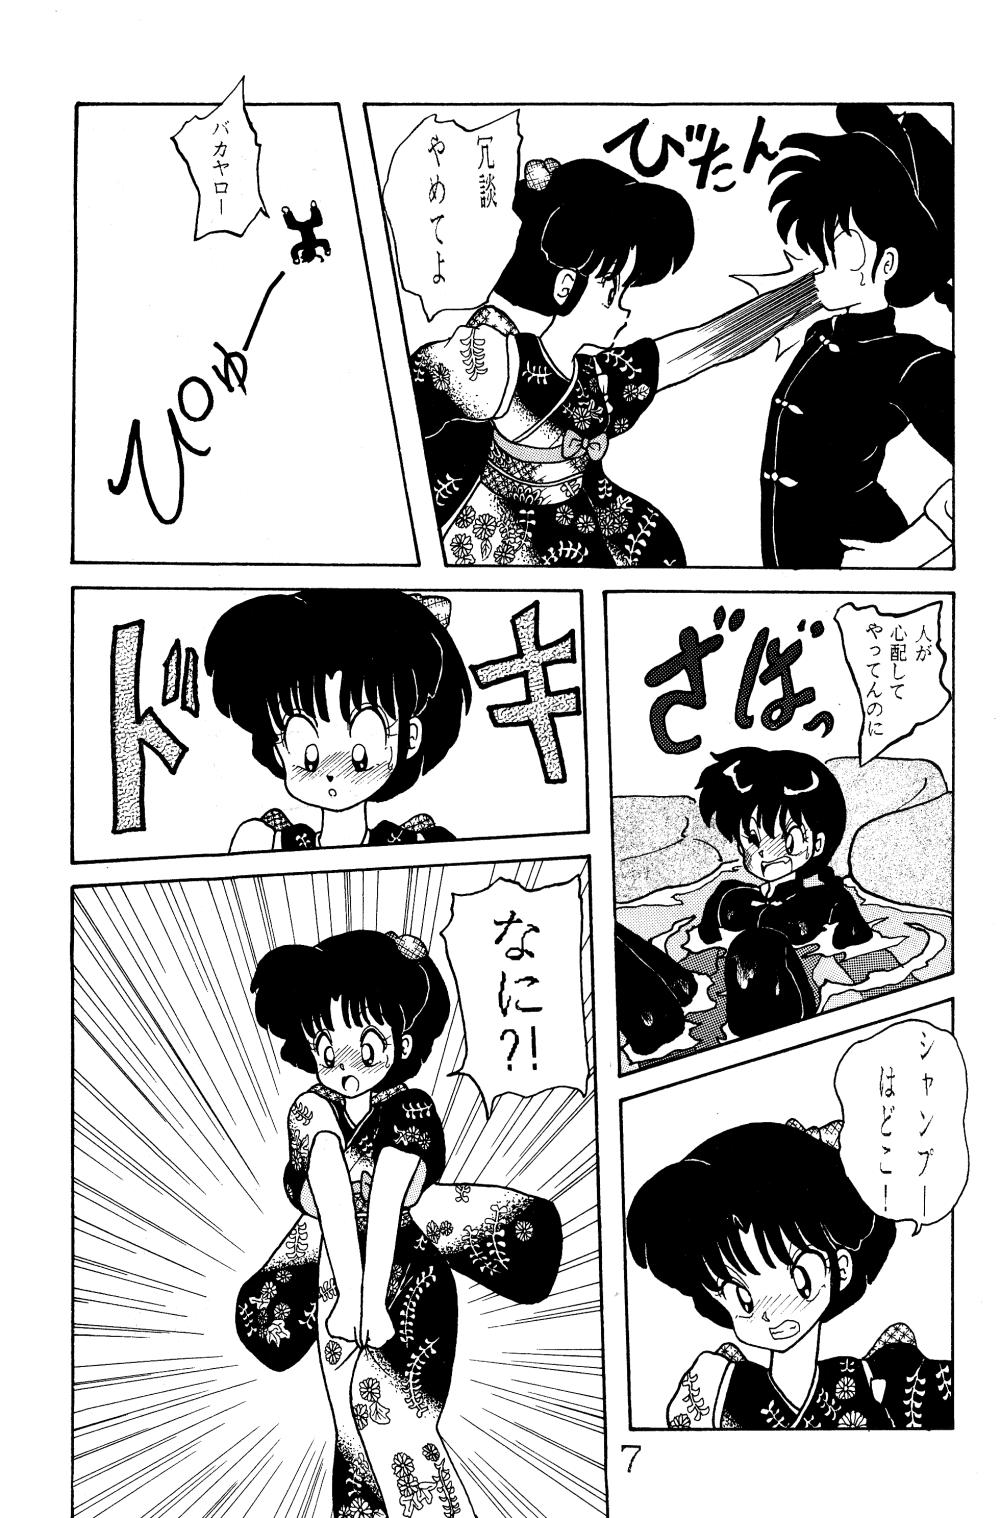 NOTORIOUS Ranma 1/2 Special 6